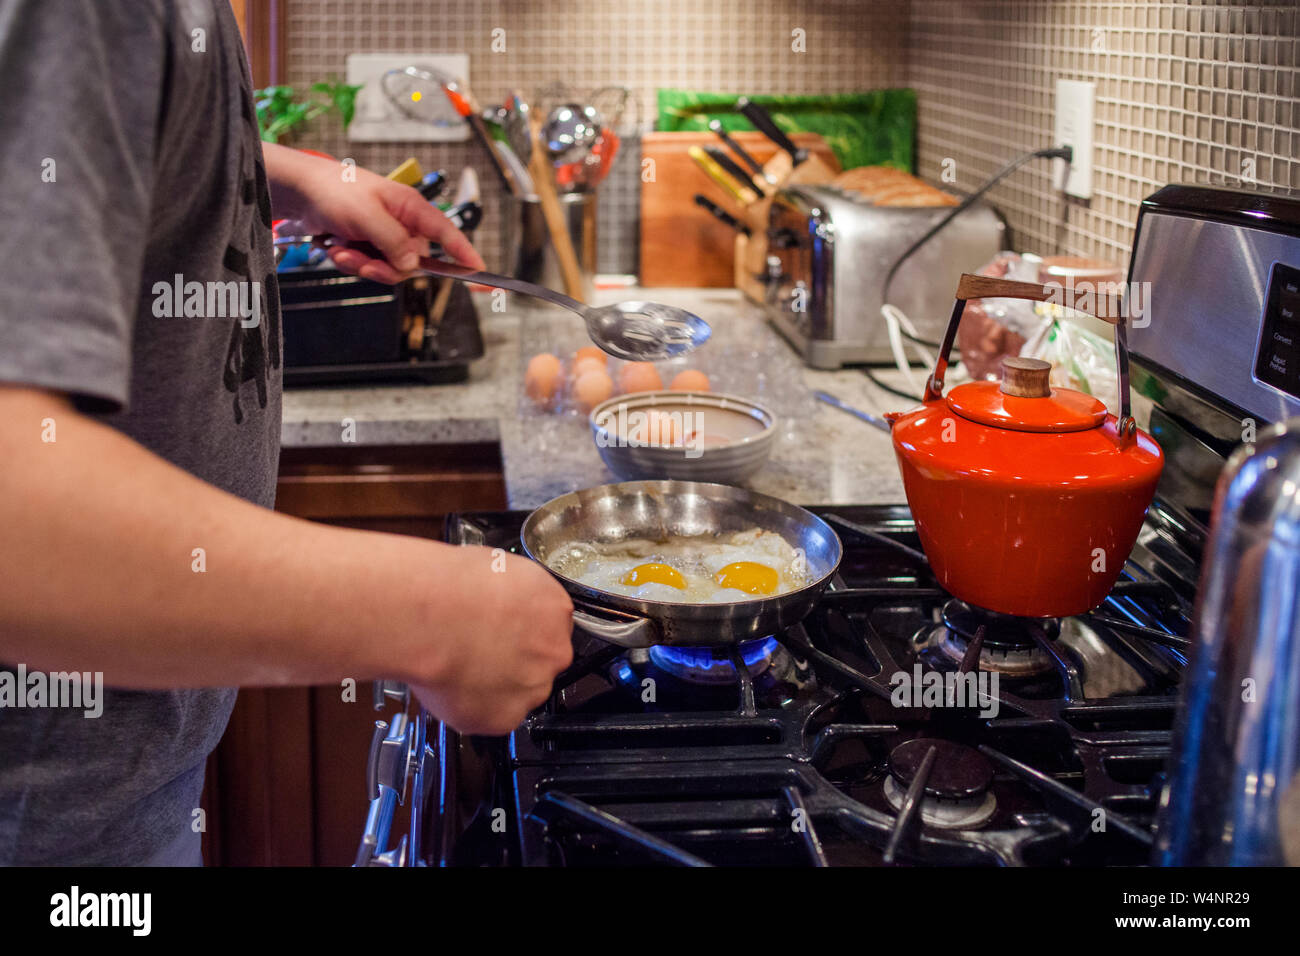 close-up view of a man's hands cooking breakfast at the kitchen stove Stock Photo